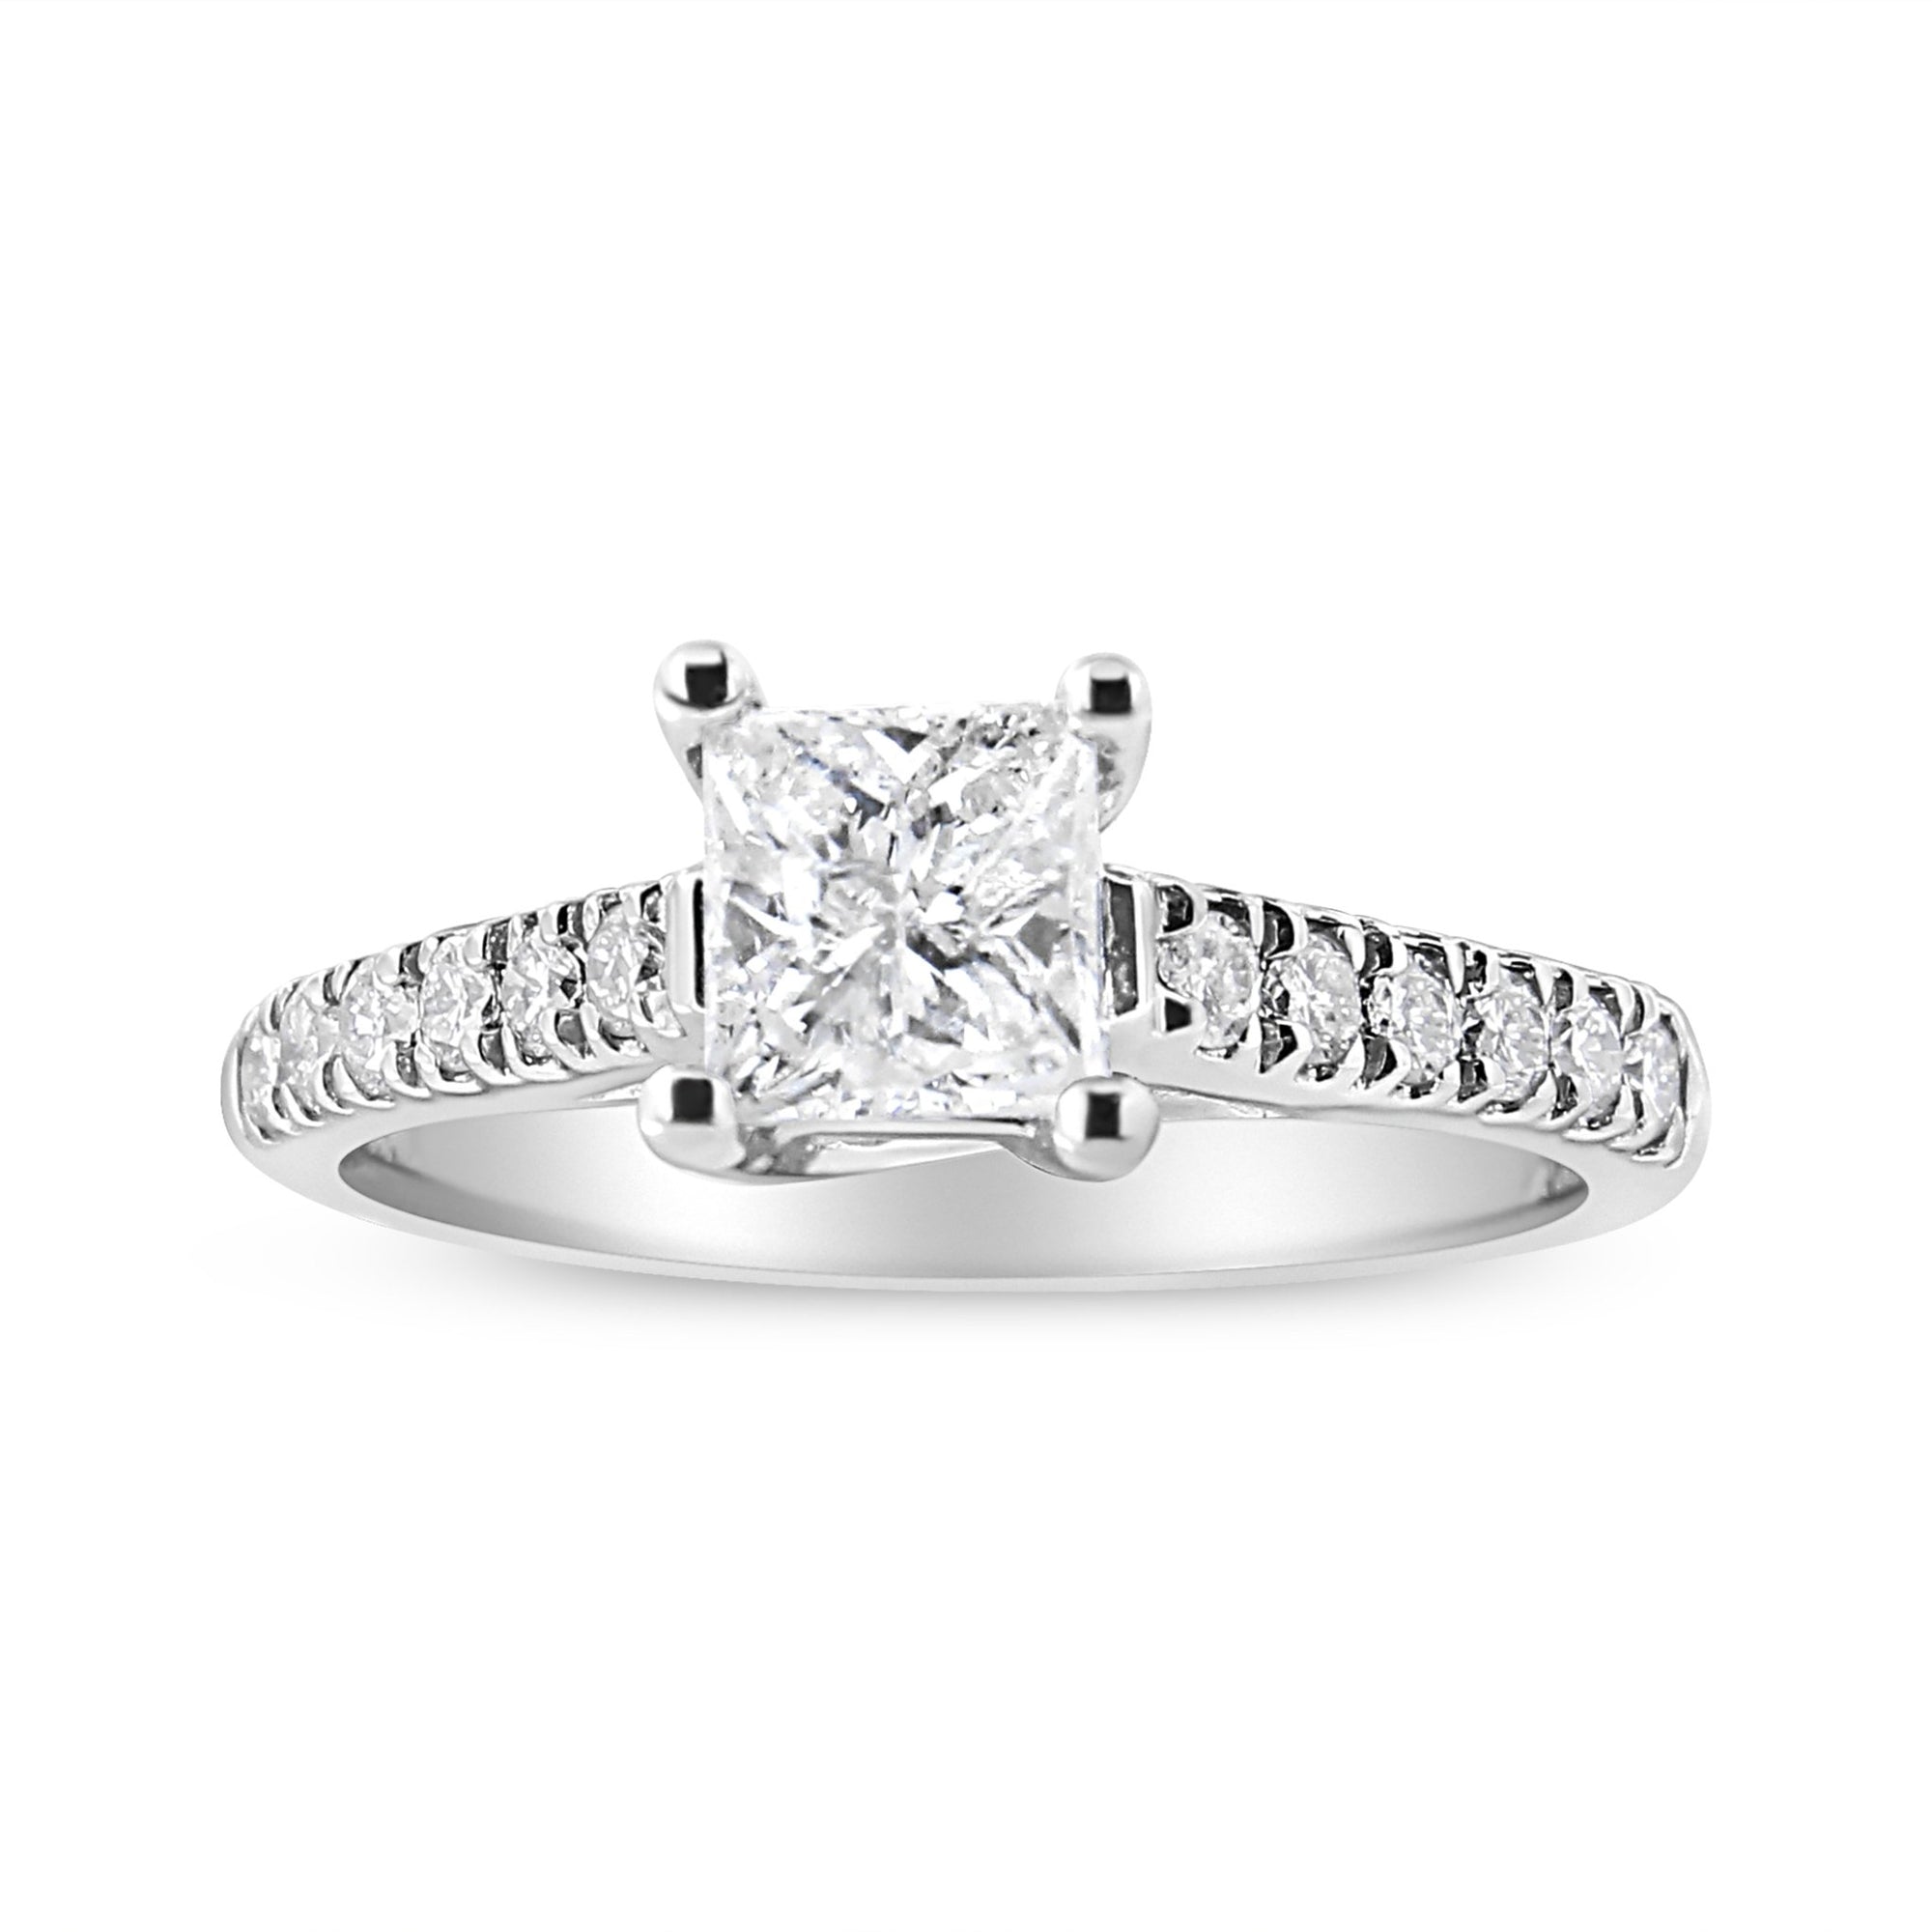 14K White Gold 1 1/5 Cttw 4-Prong Set Princess Diamond Classic Engagement Ring (I1-I2 Color, H-I Clarity) Ring Size 7 - LinkagejewelrydesignLinkagejewelrydesign